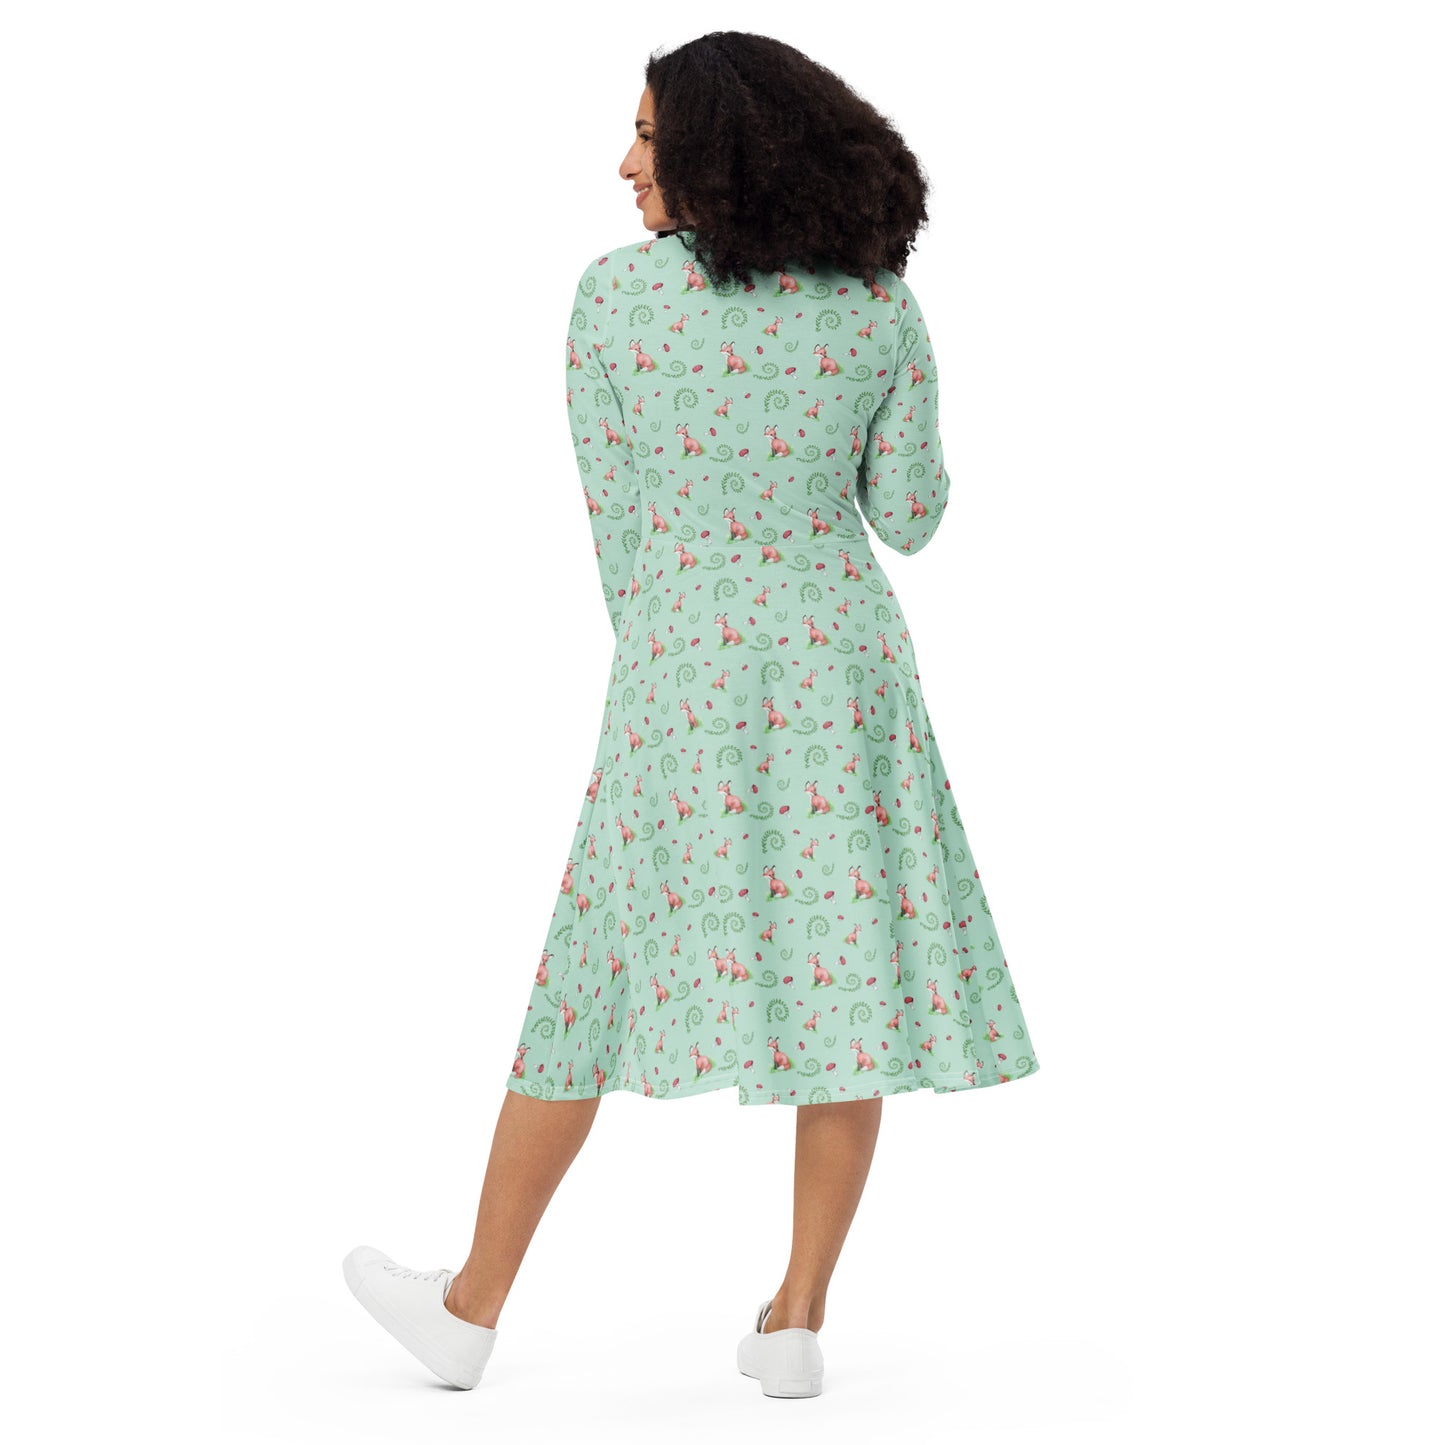 Forest fox patterned long sleeve midi dress with side pockets. Has watercolor foxes, mushrooms, and ferns on a light green fabric. Features boat neckline and fitted elastic waist. Back view on female model.